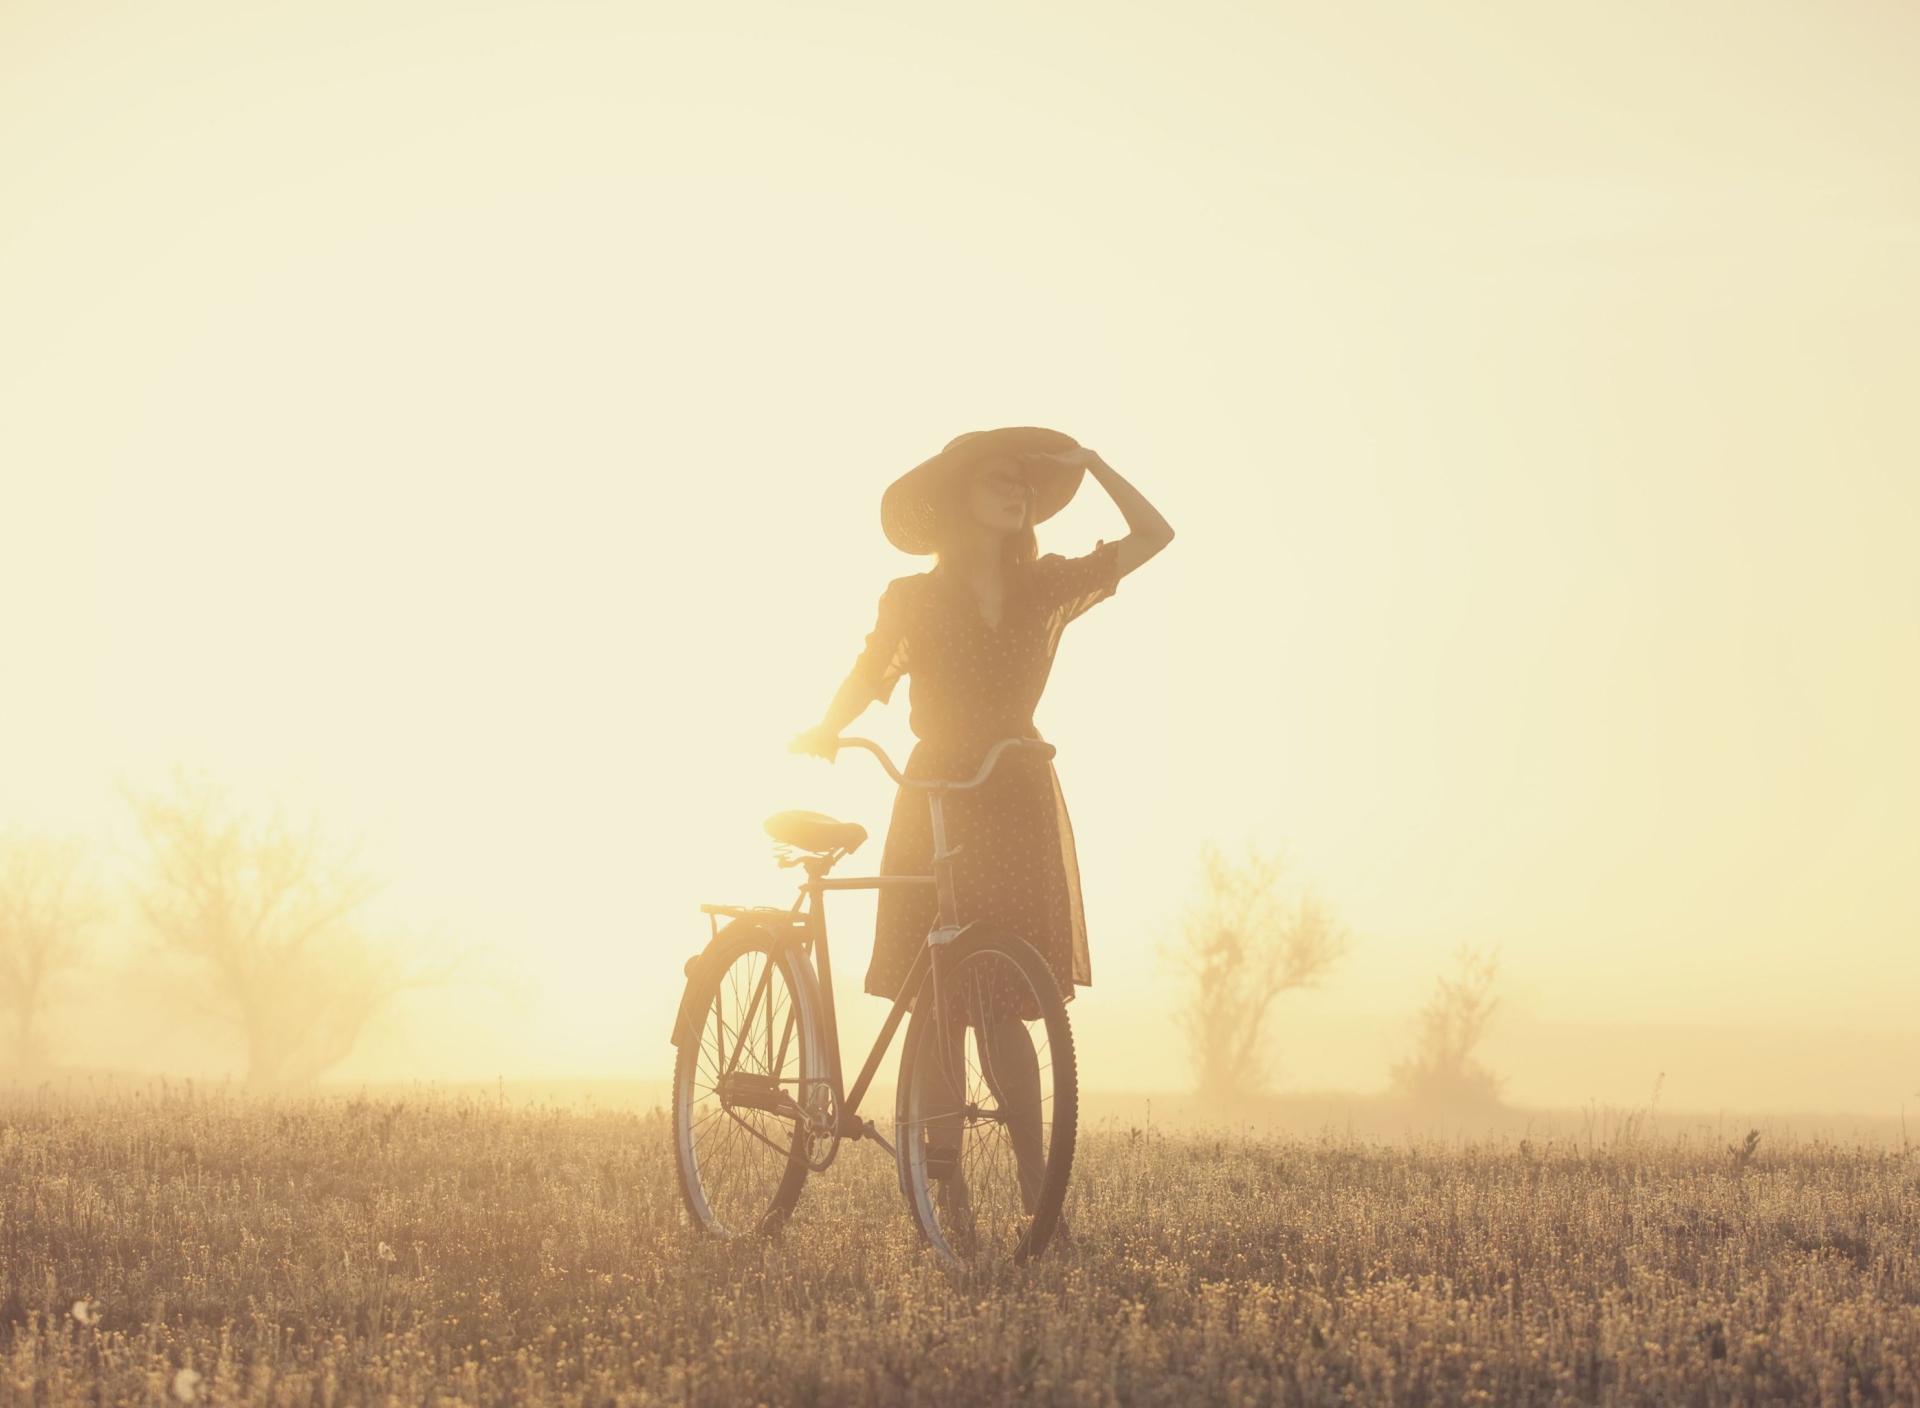 Das Girl And Bicycle On Misty Day Wallpaper 1920x1408